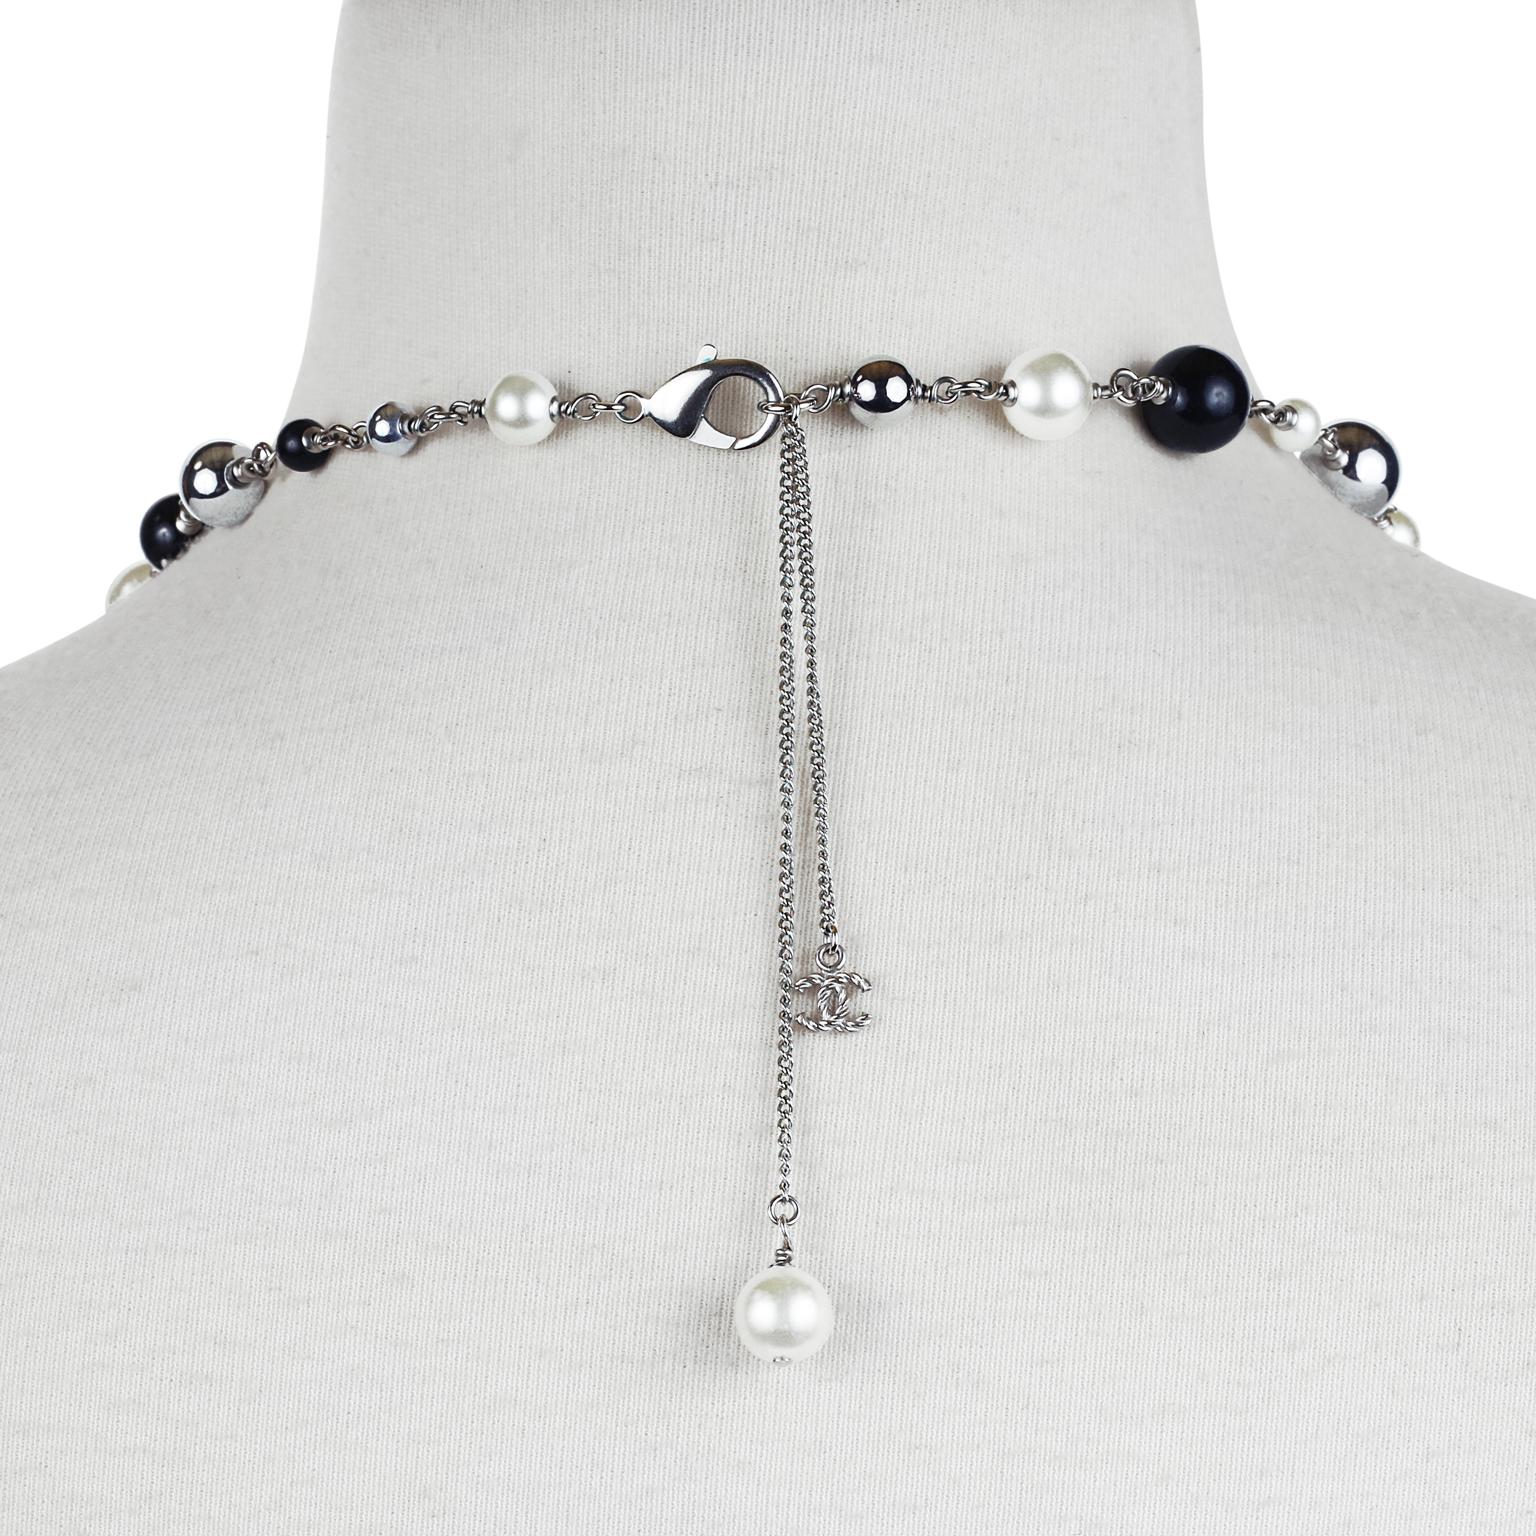 Women's or Men's Chanel Black and White Pearl Enamel Long CC Necklace